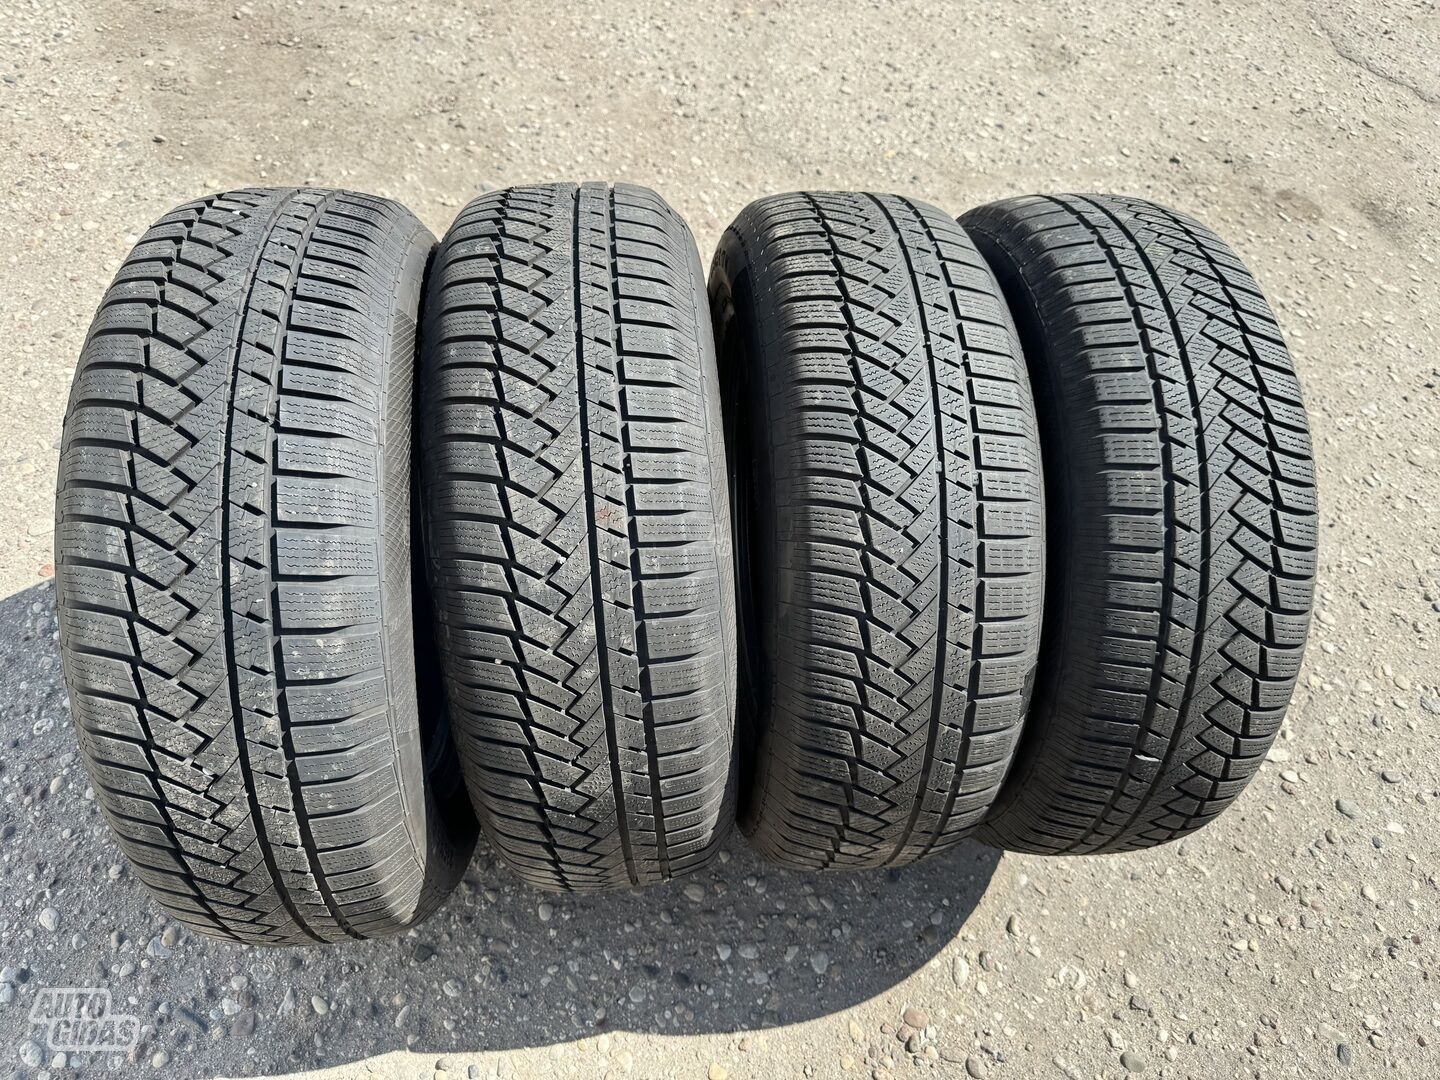 Continental Siunciam, 8+5mm 2020 R17 universal tyres passanger car